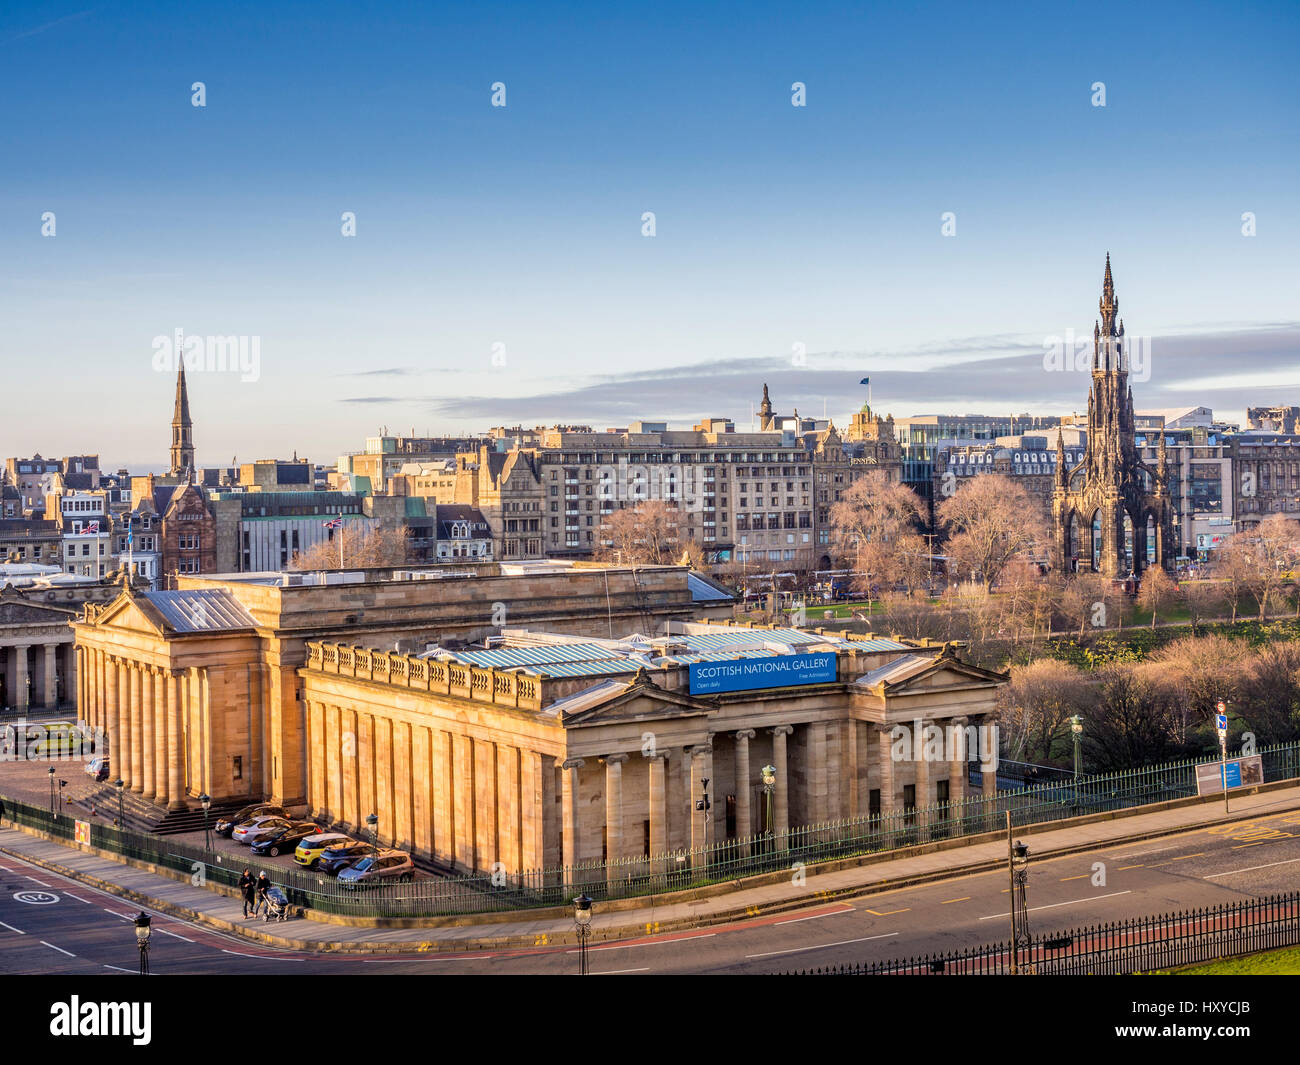 Elevated view of the Scottish National Gallery on The Mound with the Scott Monument to the right. Edinburgh, Scotland, UK. Stock Photo